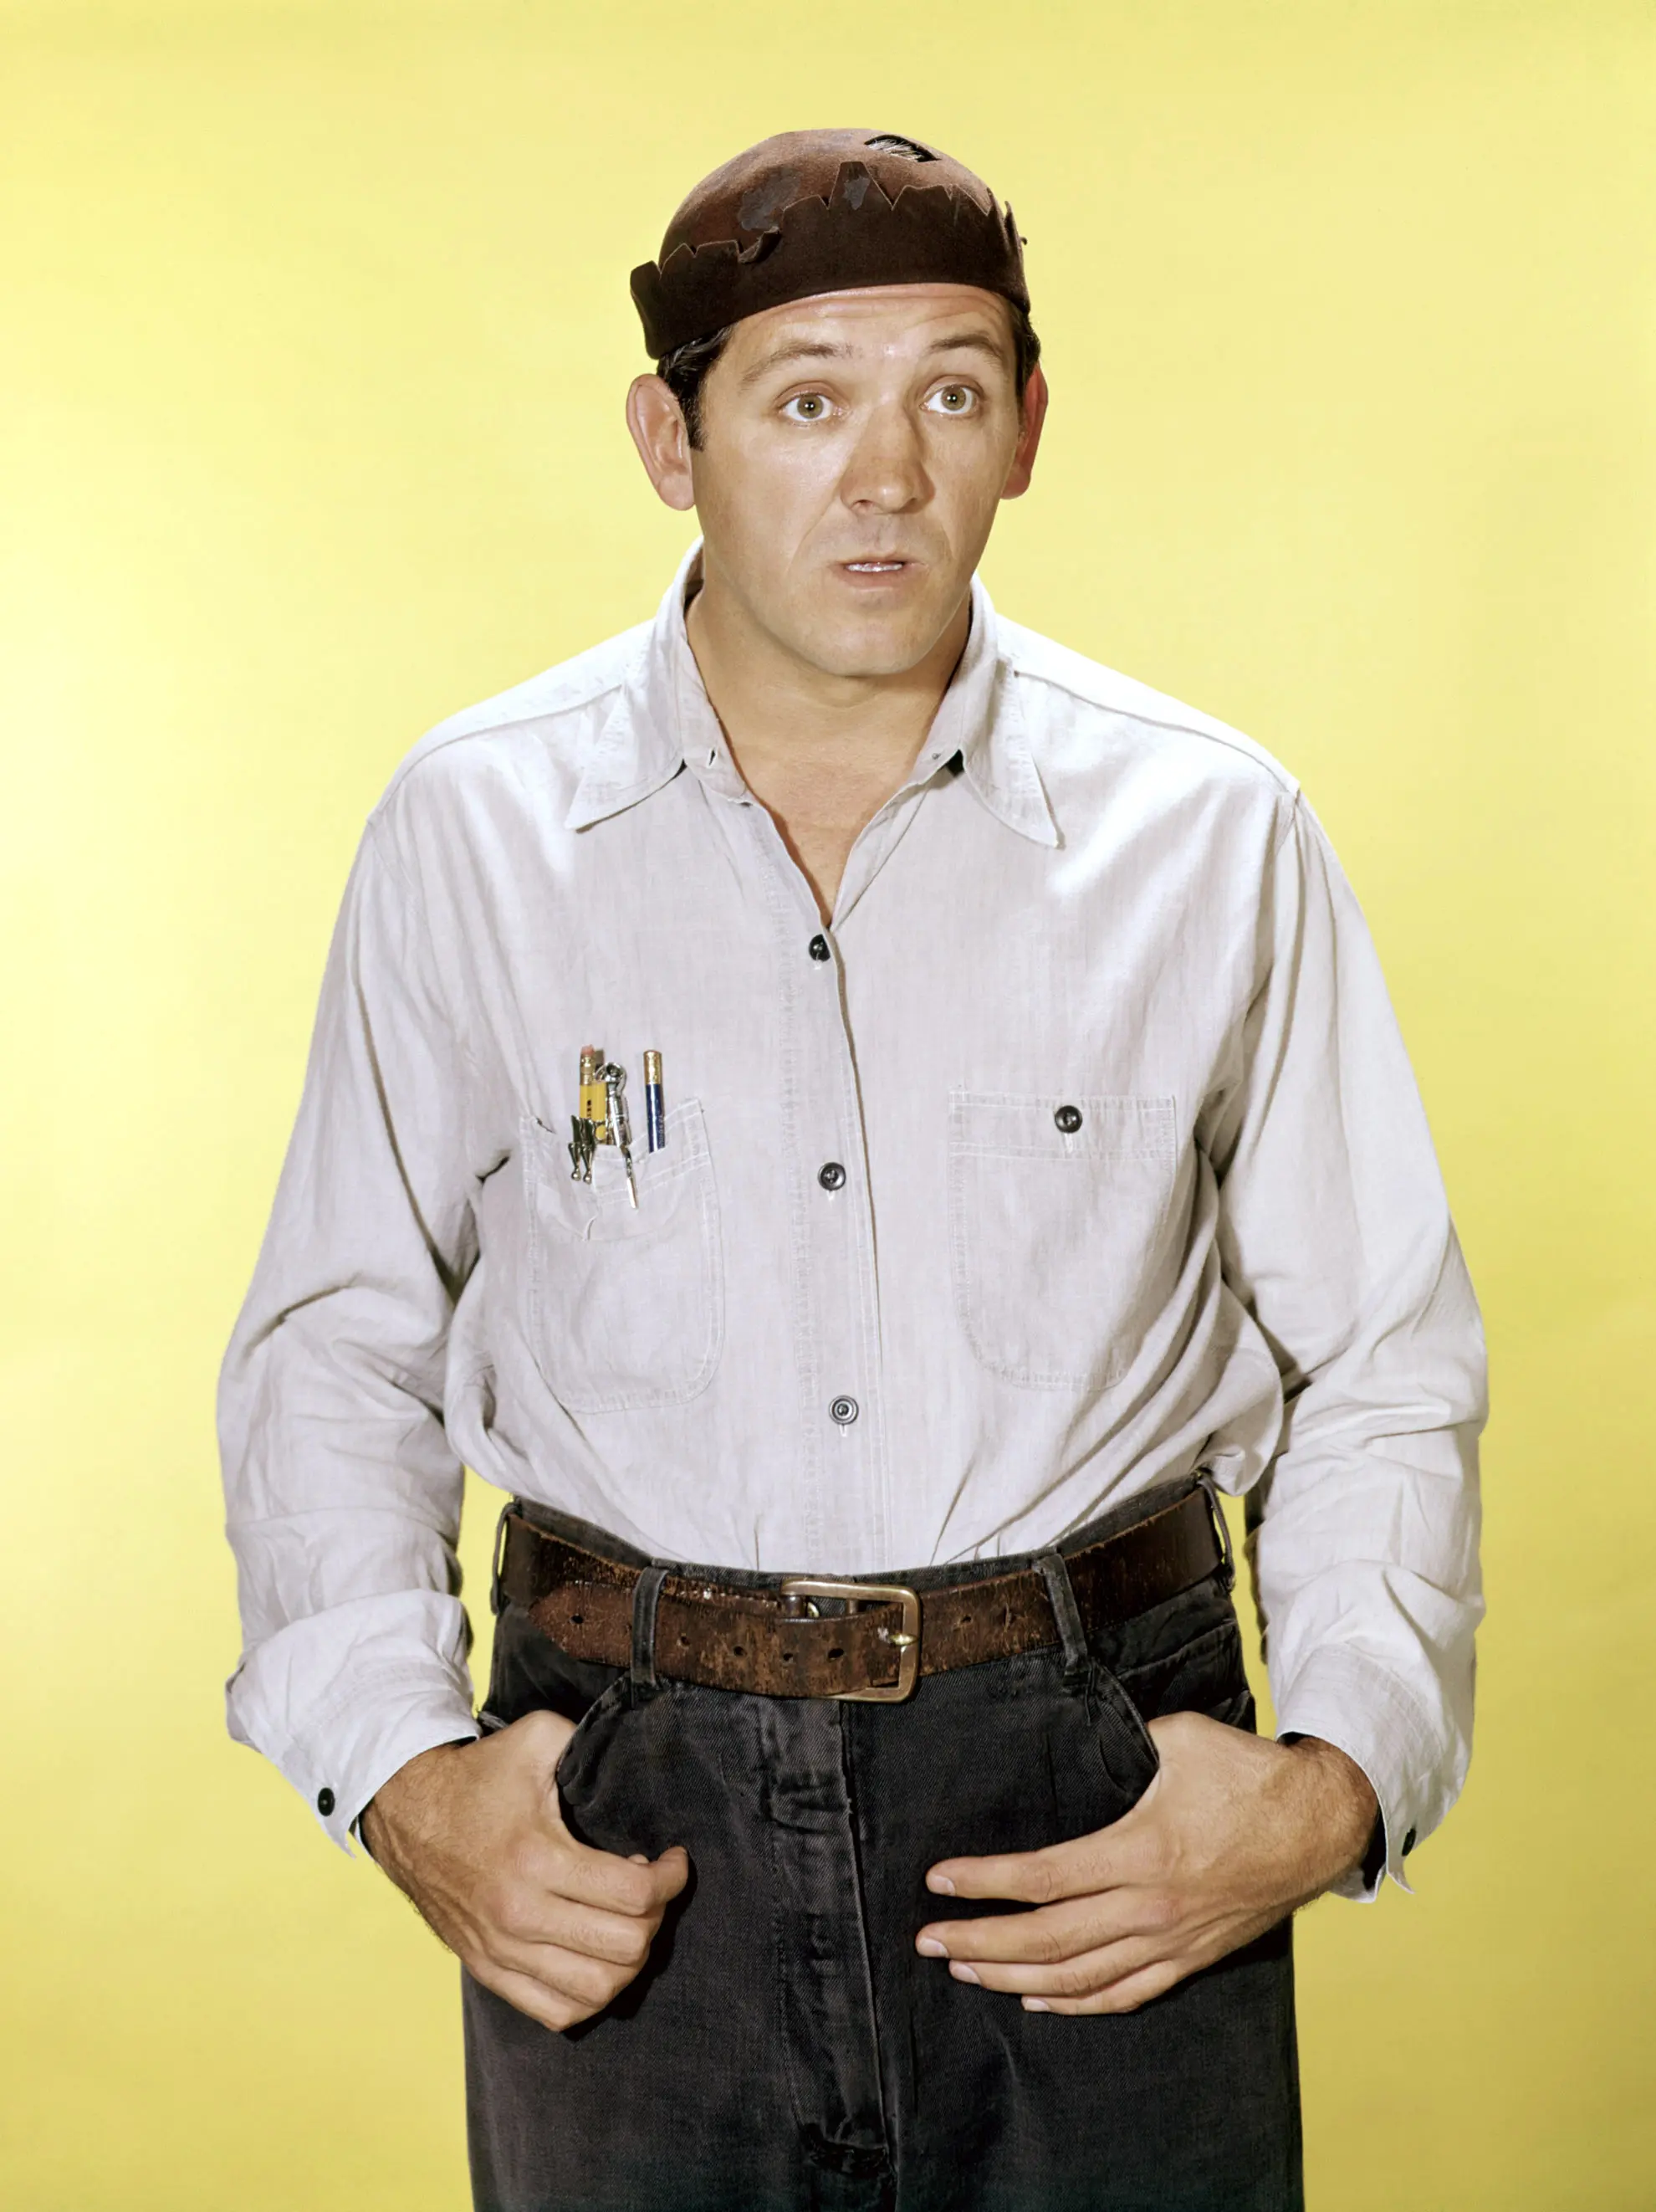 THE ANDY GRIFFITH SHOW, George Lindsey, 1960-68 